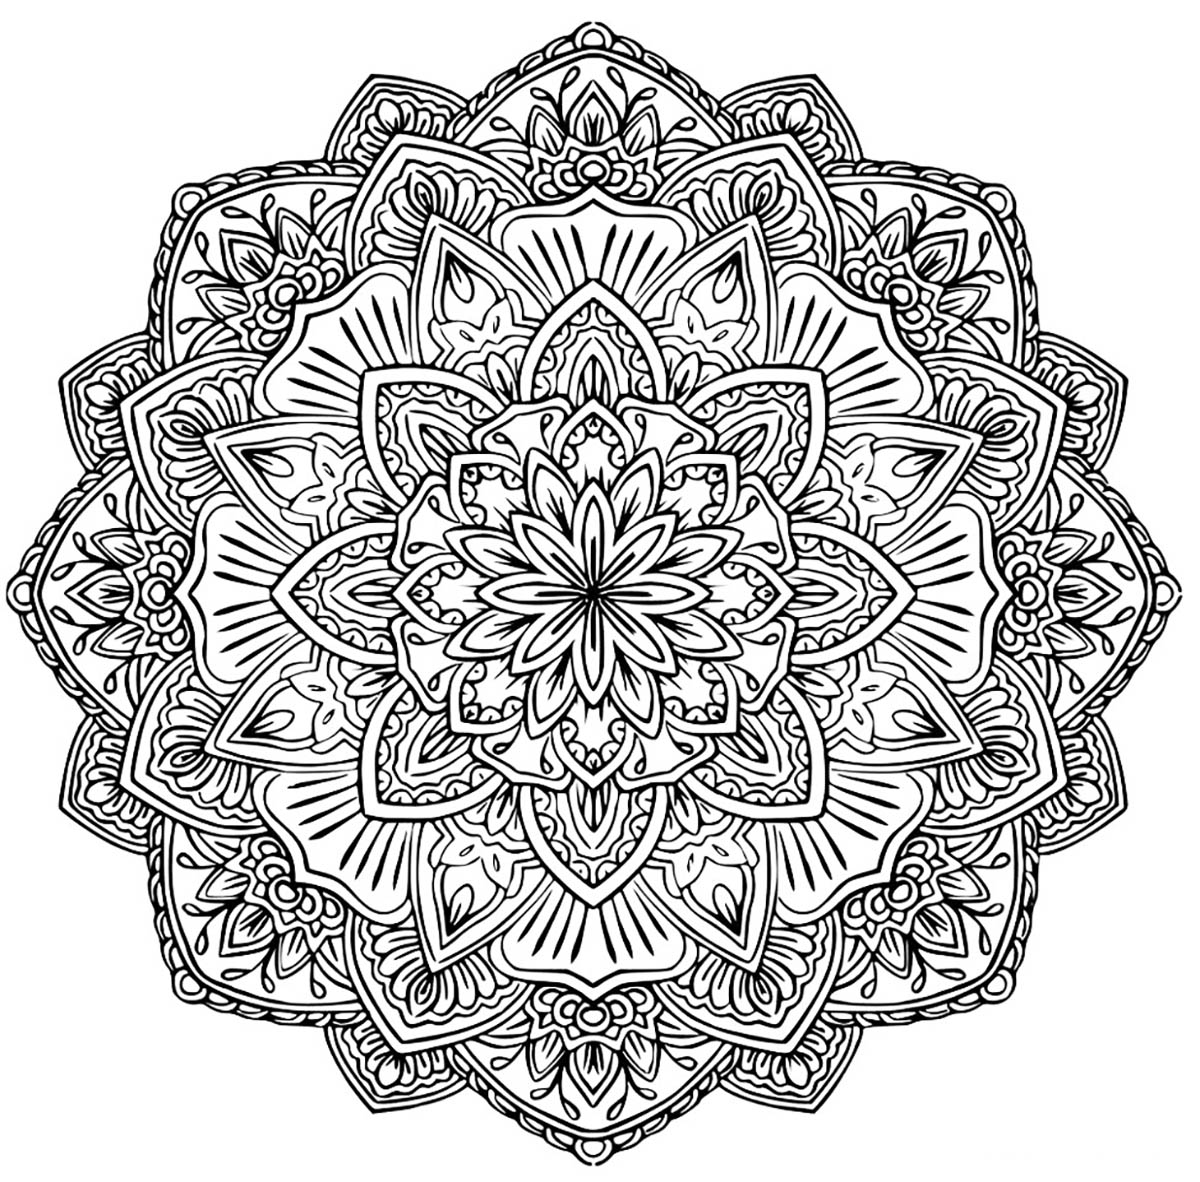 Mandala to download in pdf 1 Malas Adult Coloring Pages